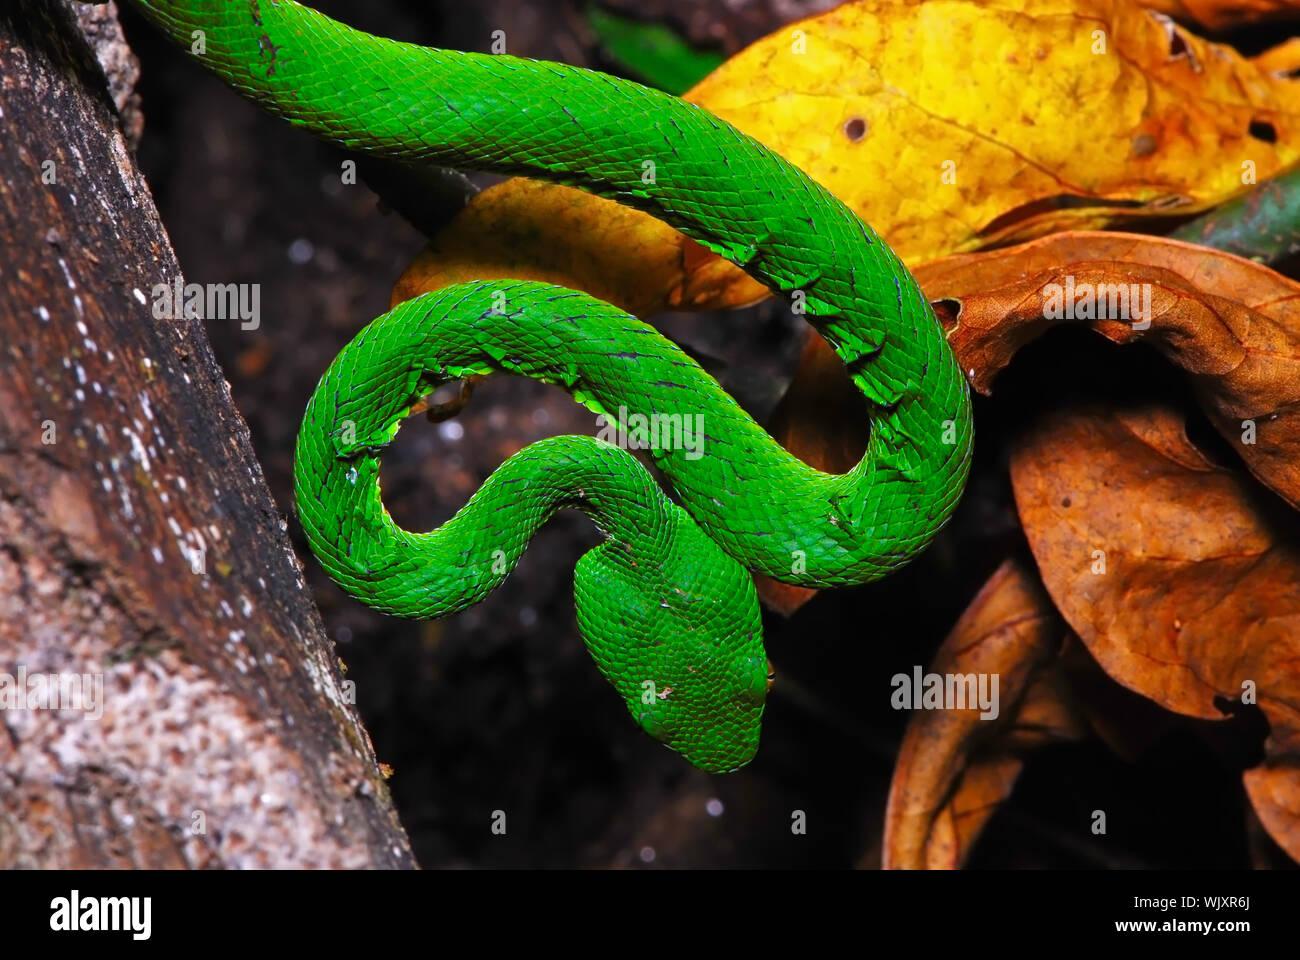 Green snake, Green pit viper or Asian pit viper, in ground forest Stock Photo